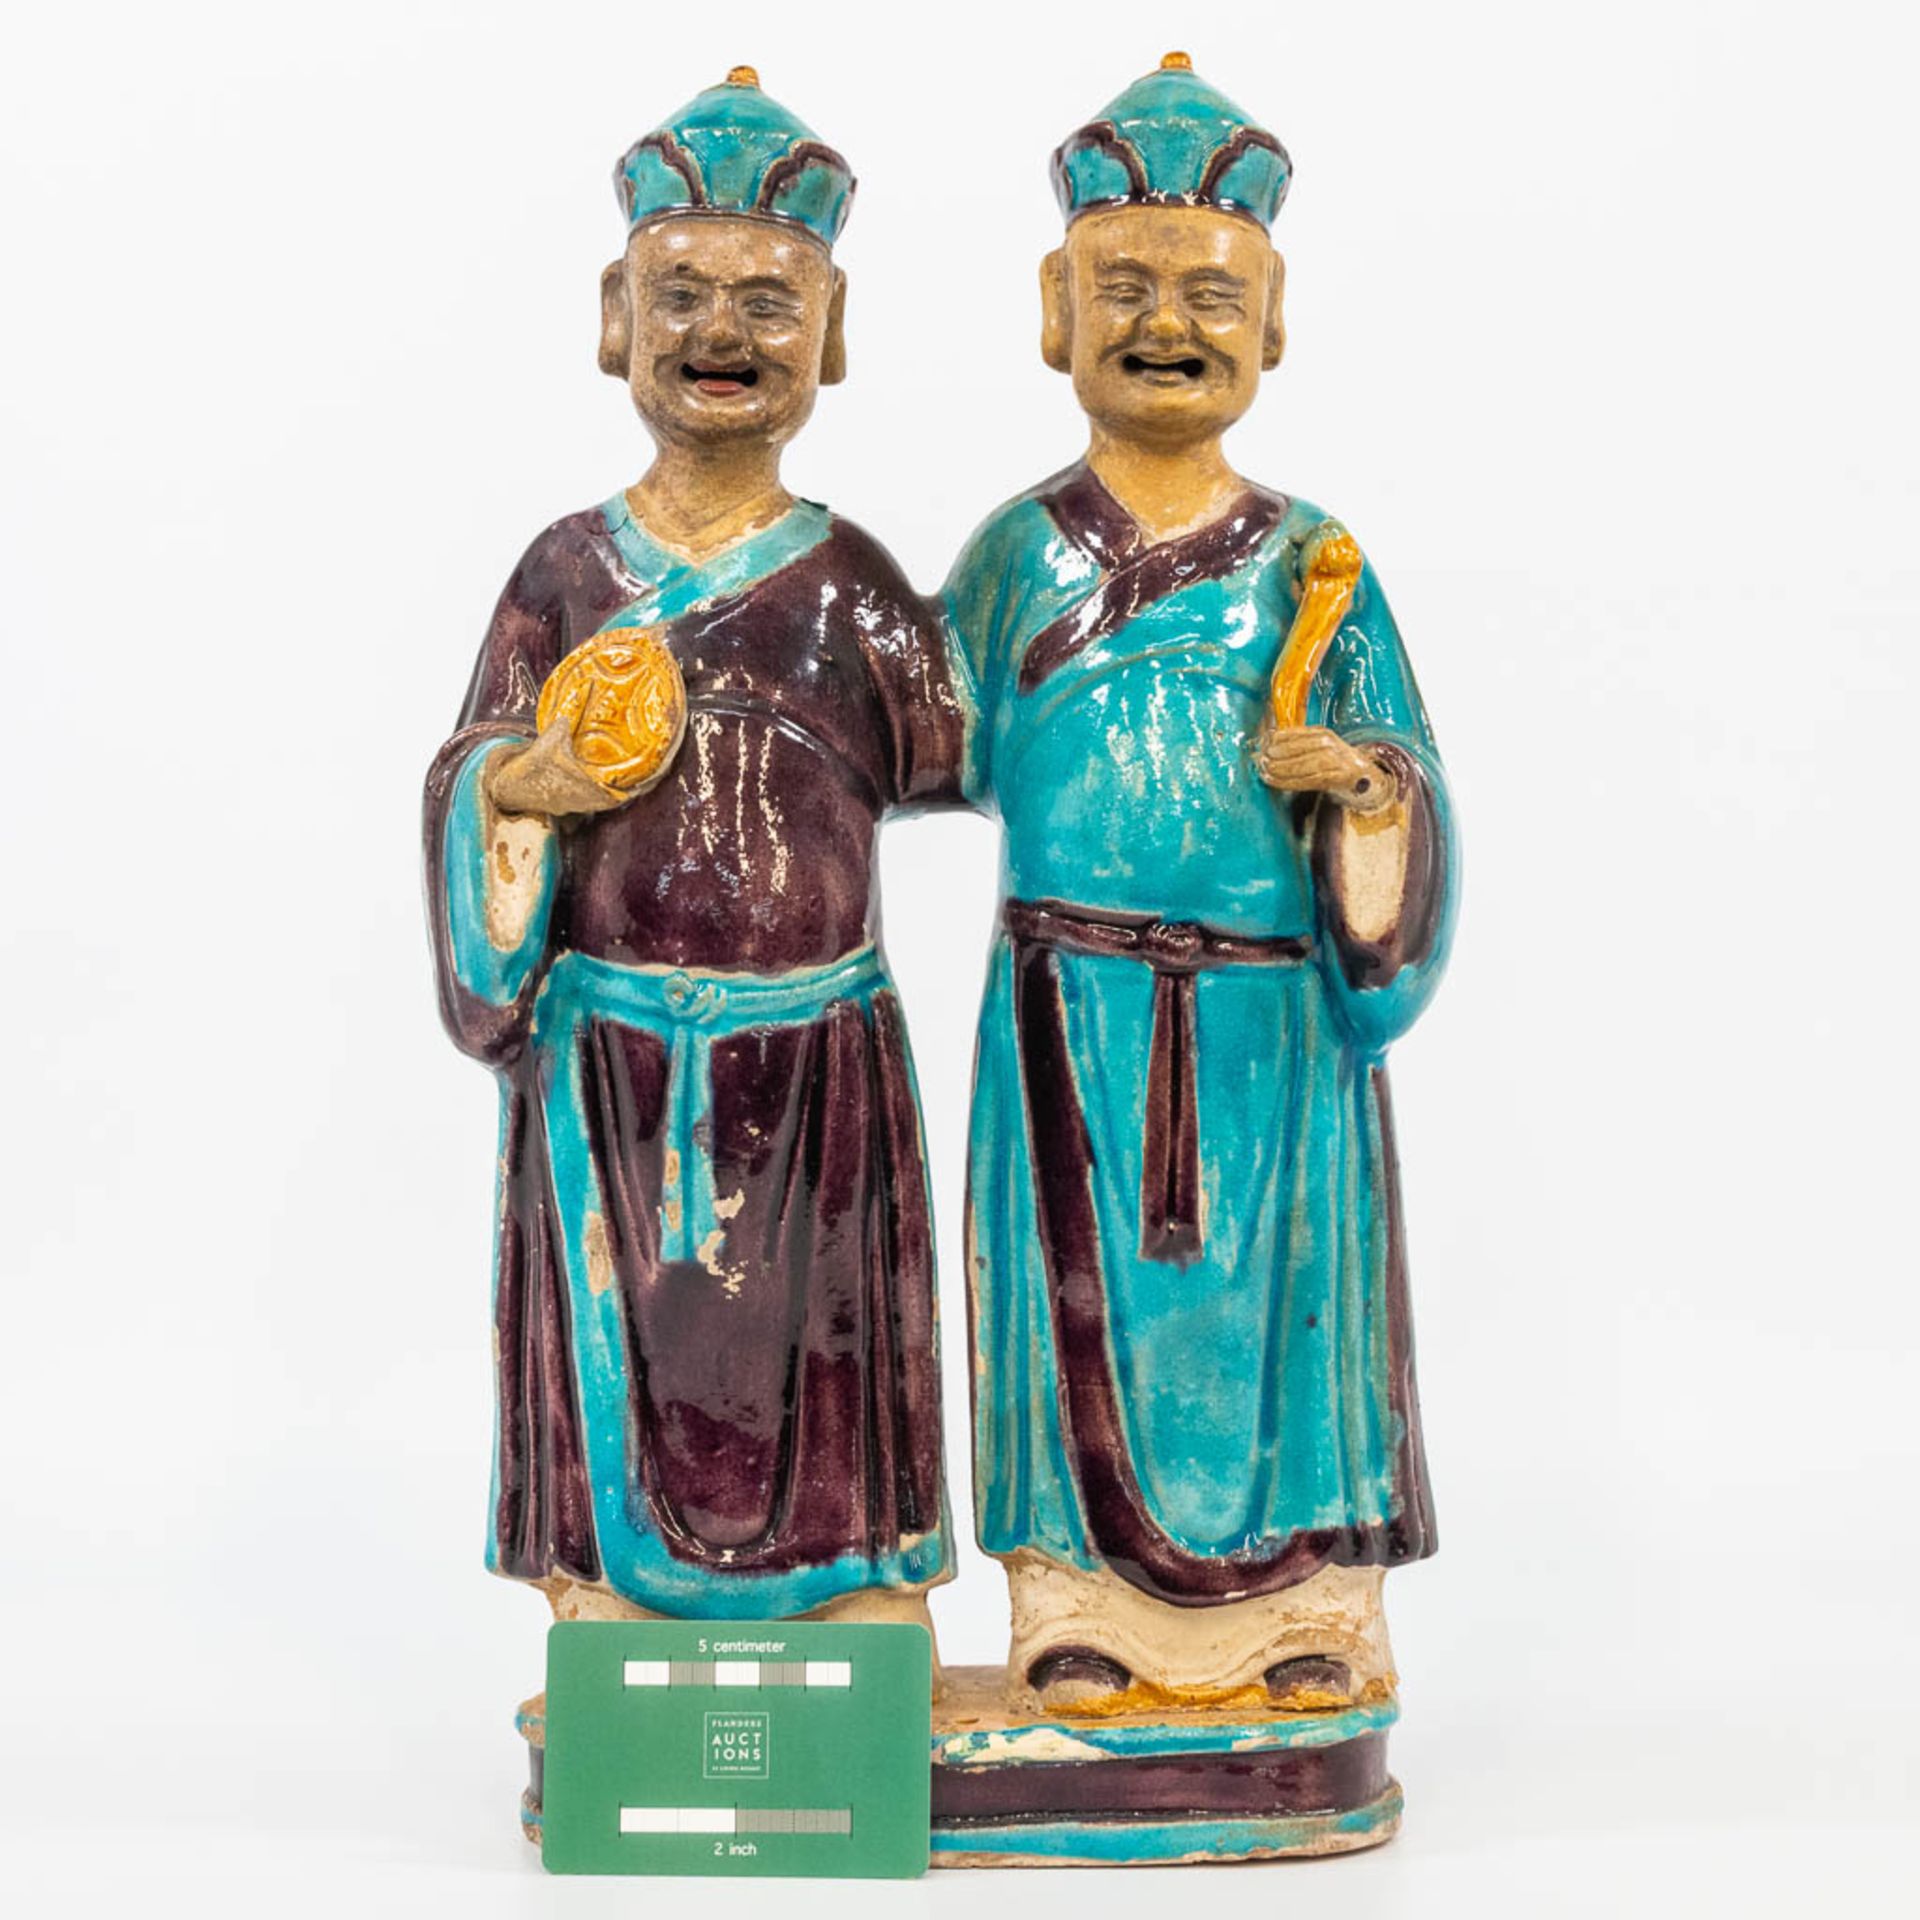 A statue made of glazed earthenware, a pair of Easern figurines. (8,5 x 24 x 41 cm) - Bild 10 aus 16